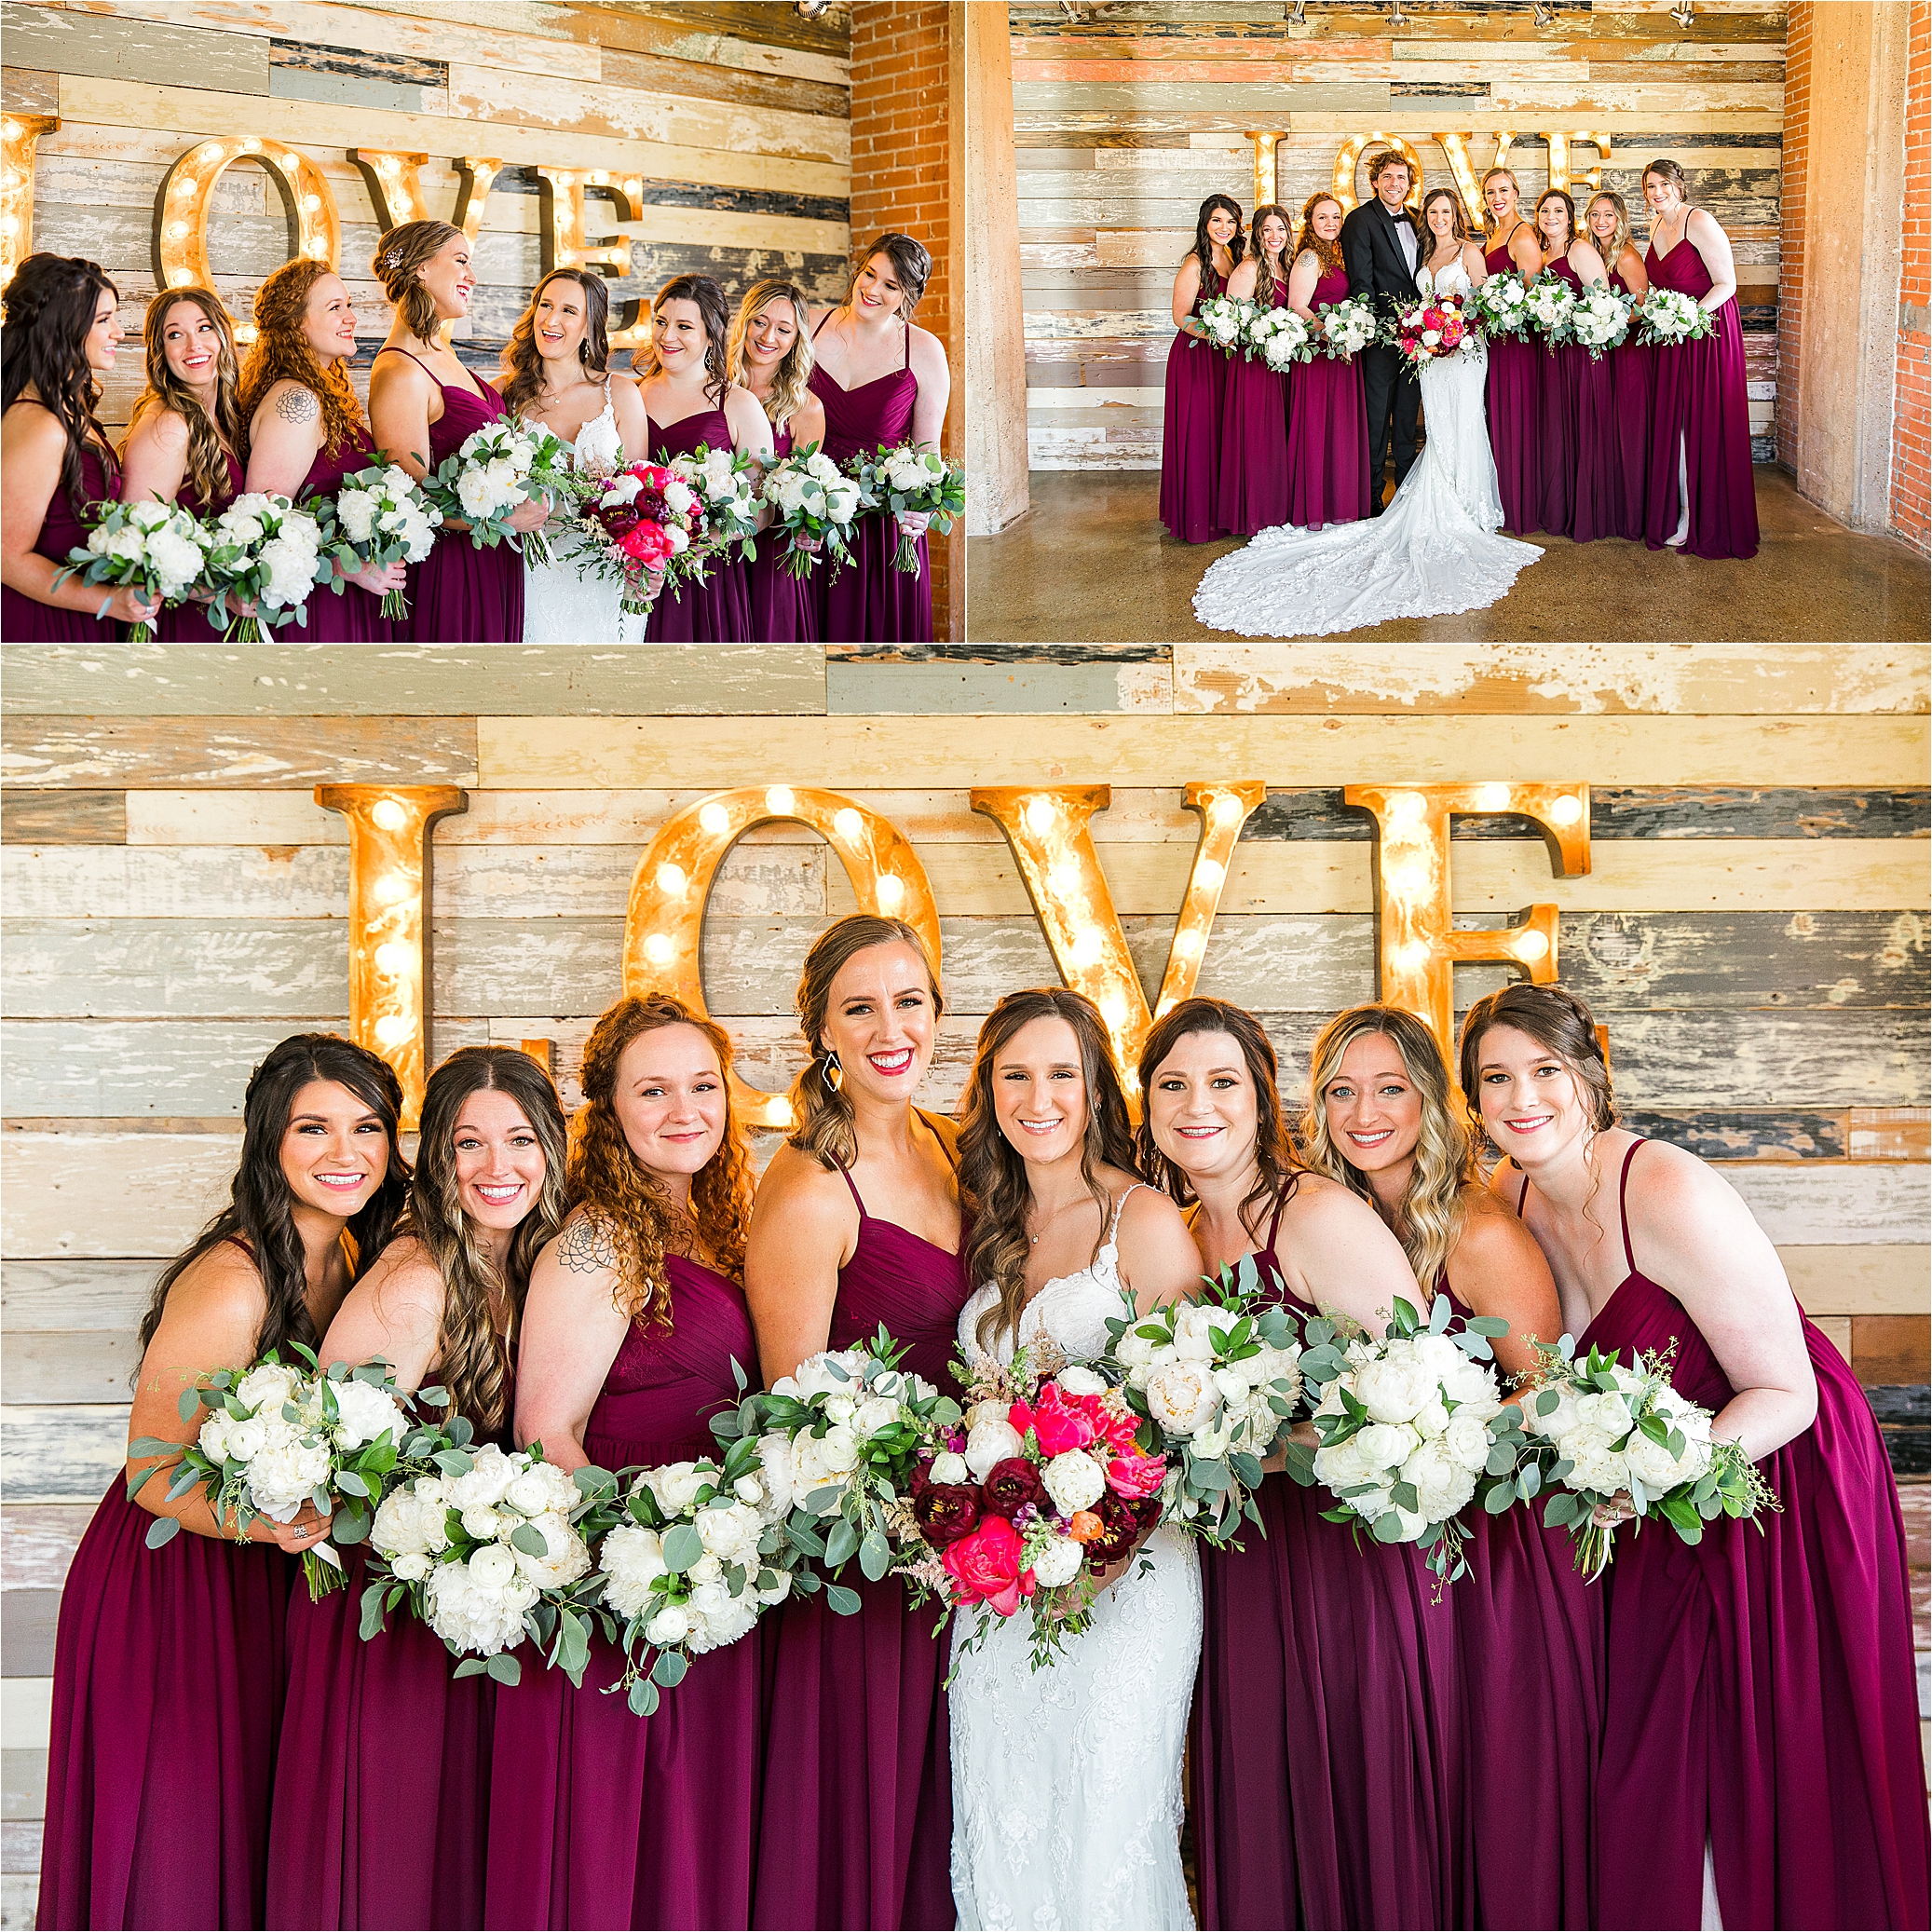 A bridal party poses for wedding day photos in the bridal suite of Hickory Street Annex in Dallas, Texas with Wedding Photographer Jillian Hogan 